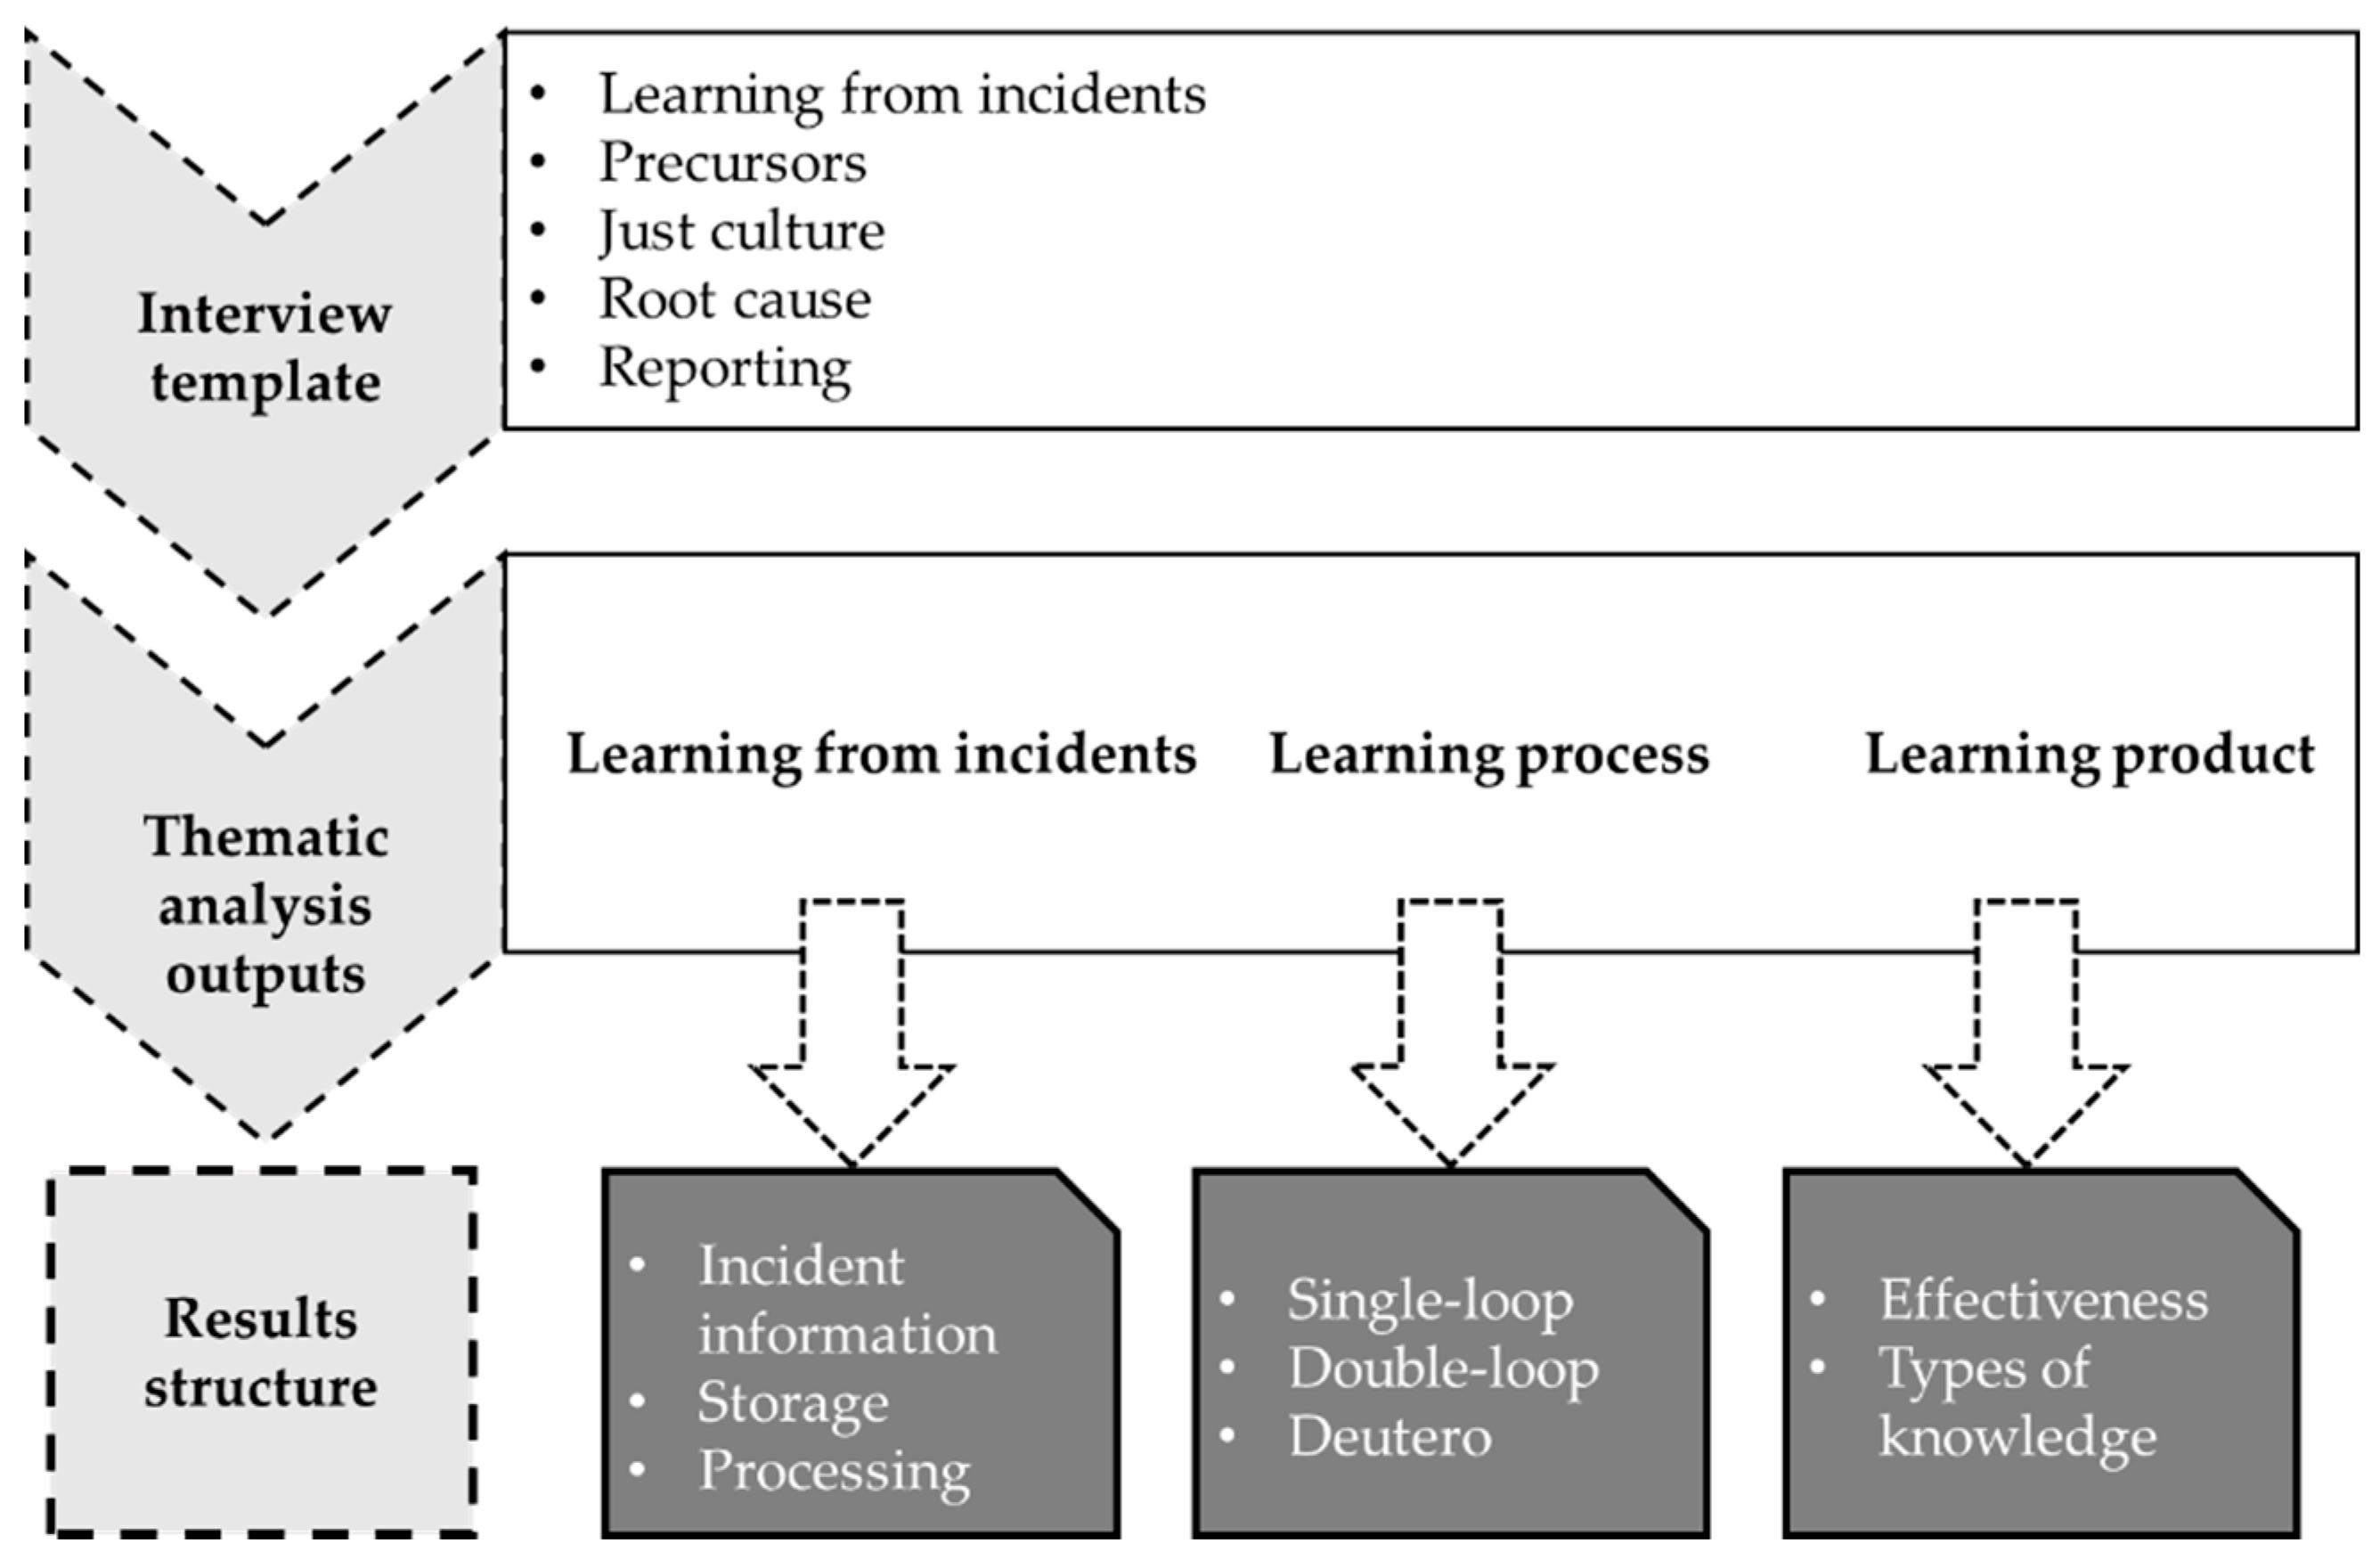 Develop a Learning From Incidents (LFI) culture that engages front